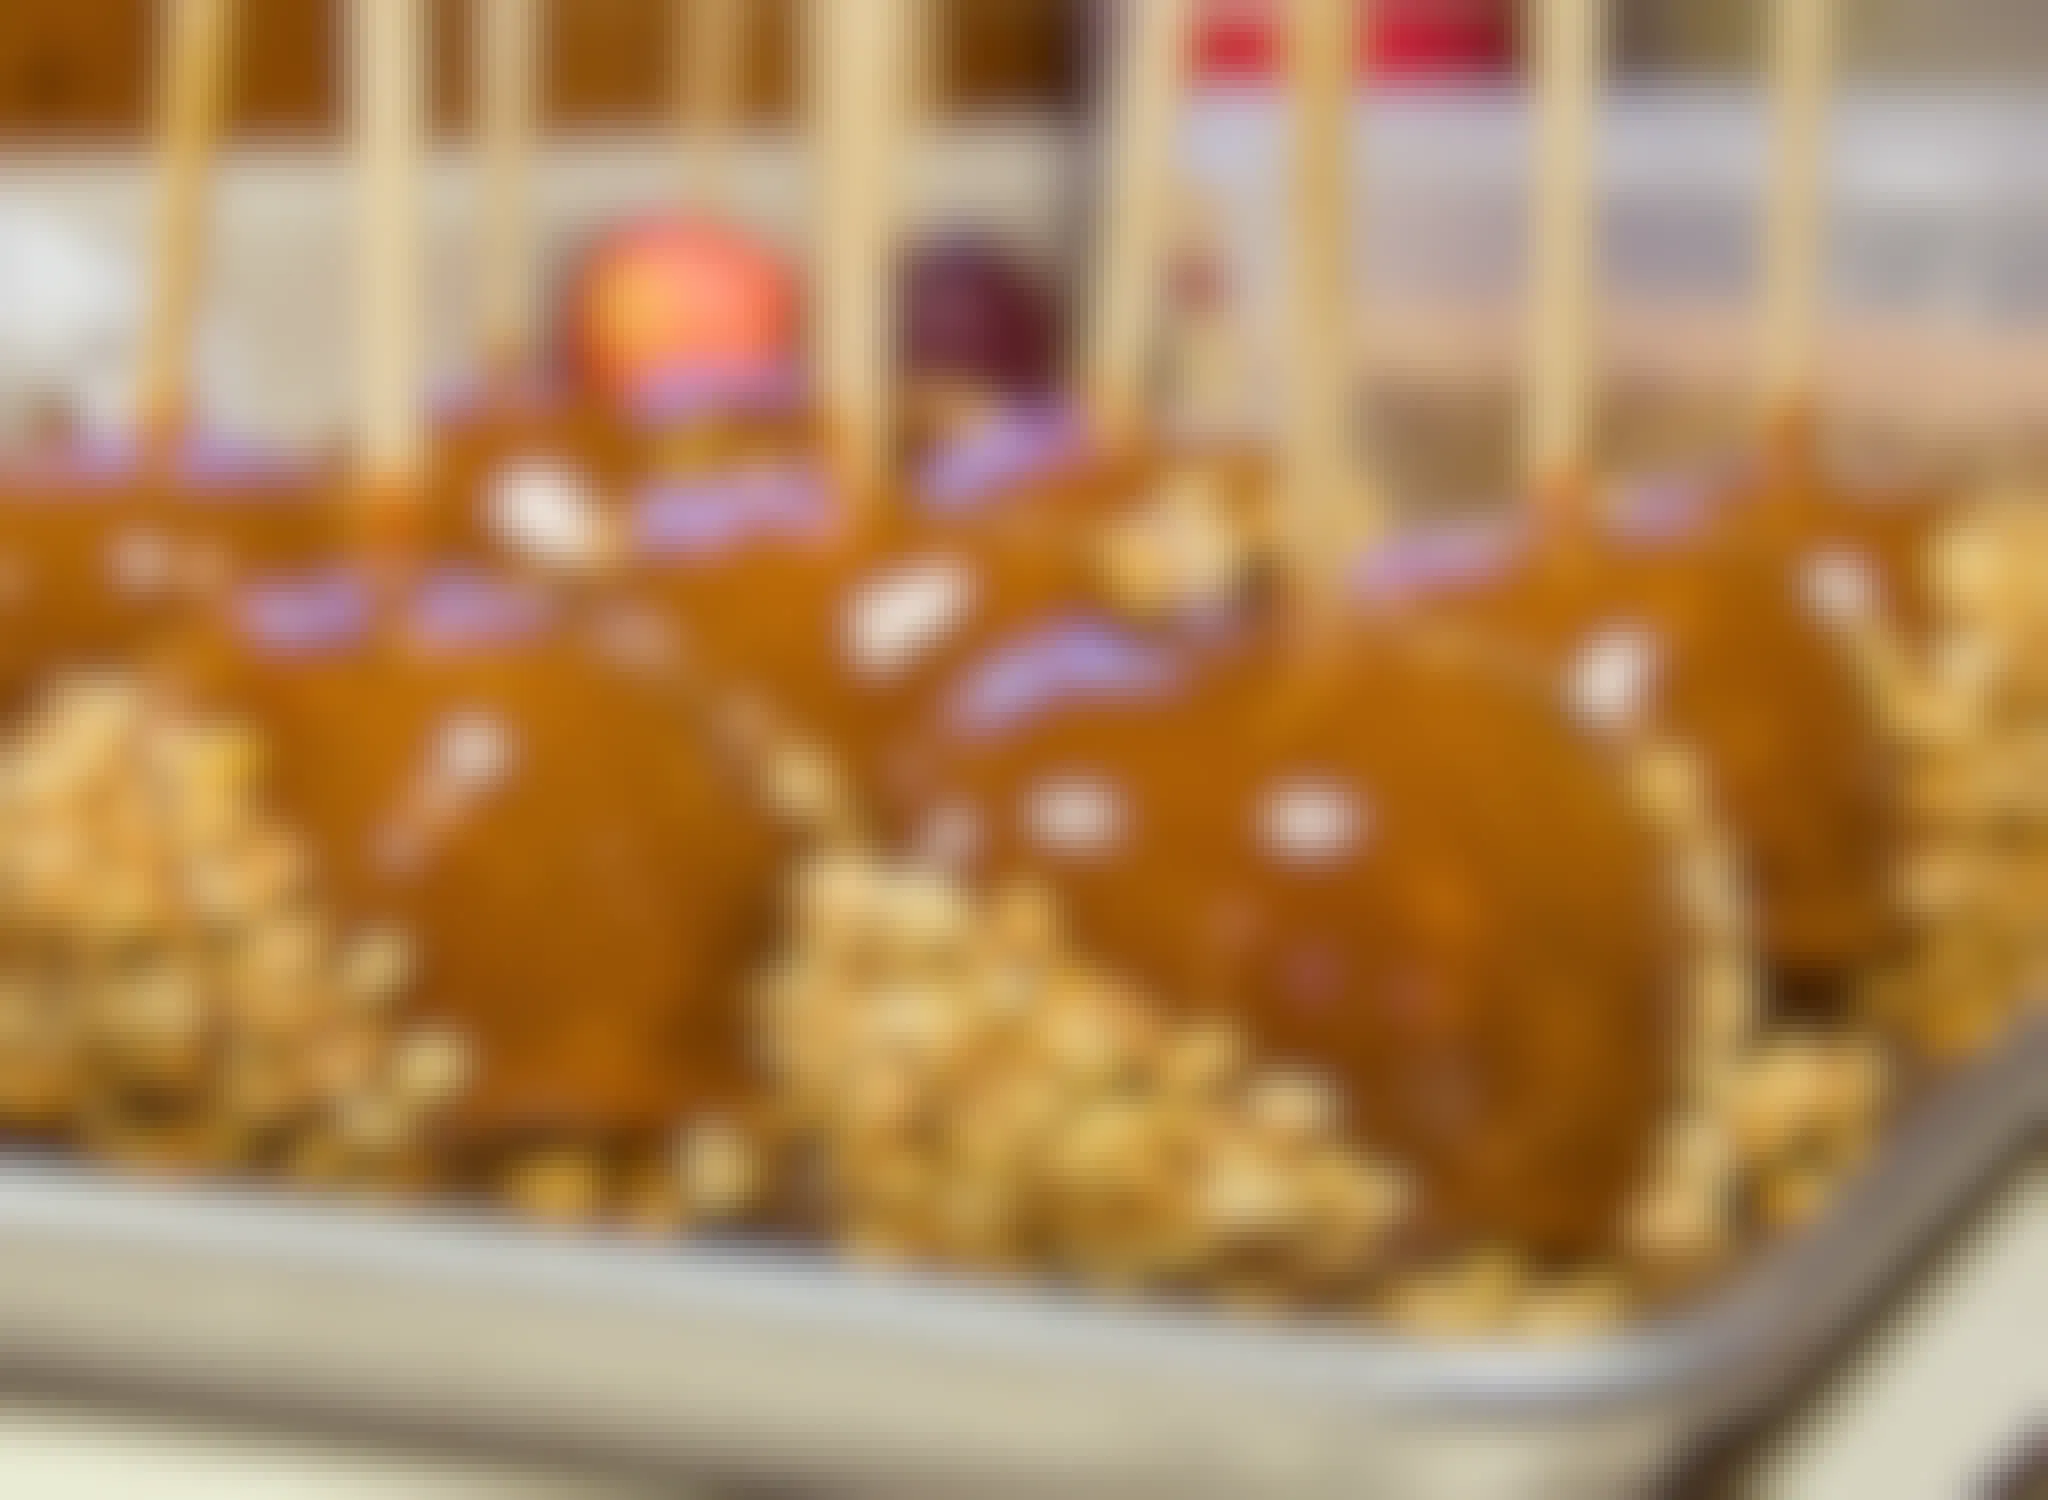 caramel apples dipped in nuts on baking sheet